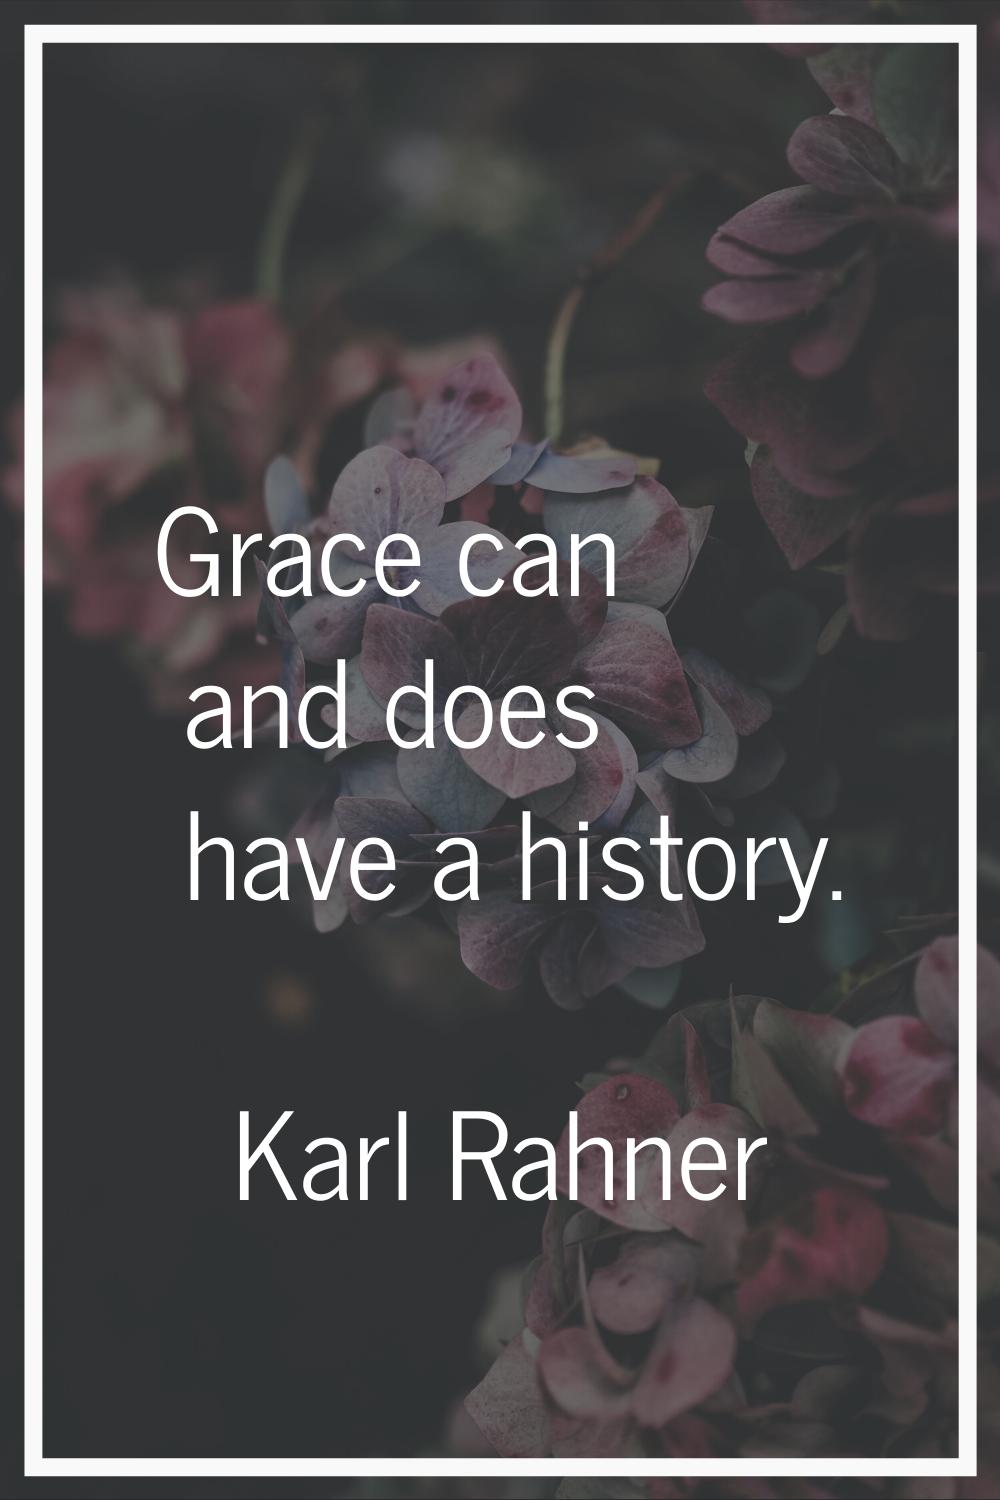 Grace can and does have a history.